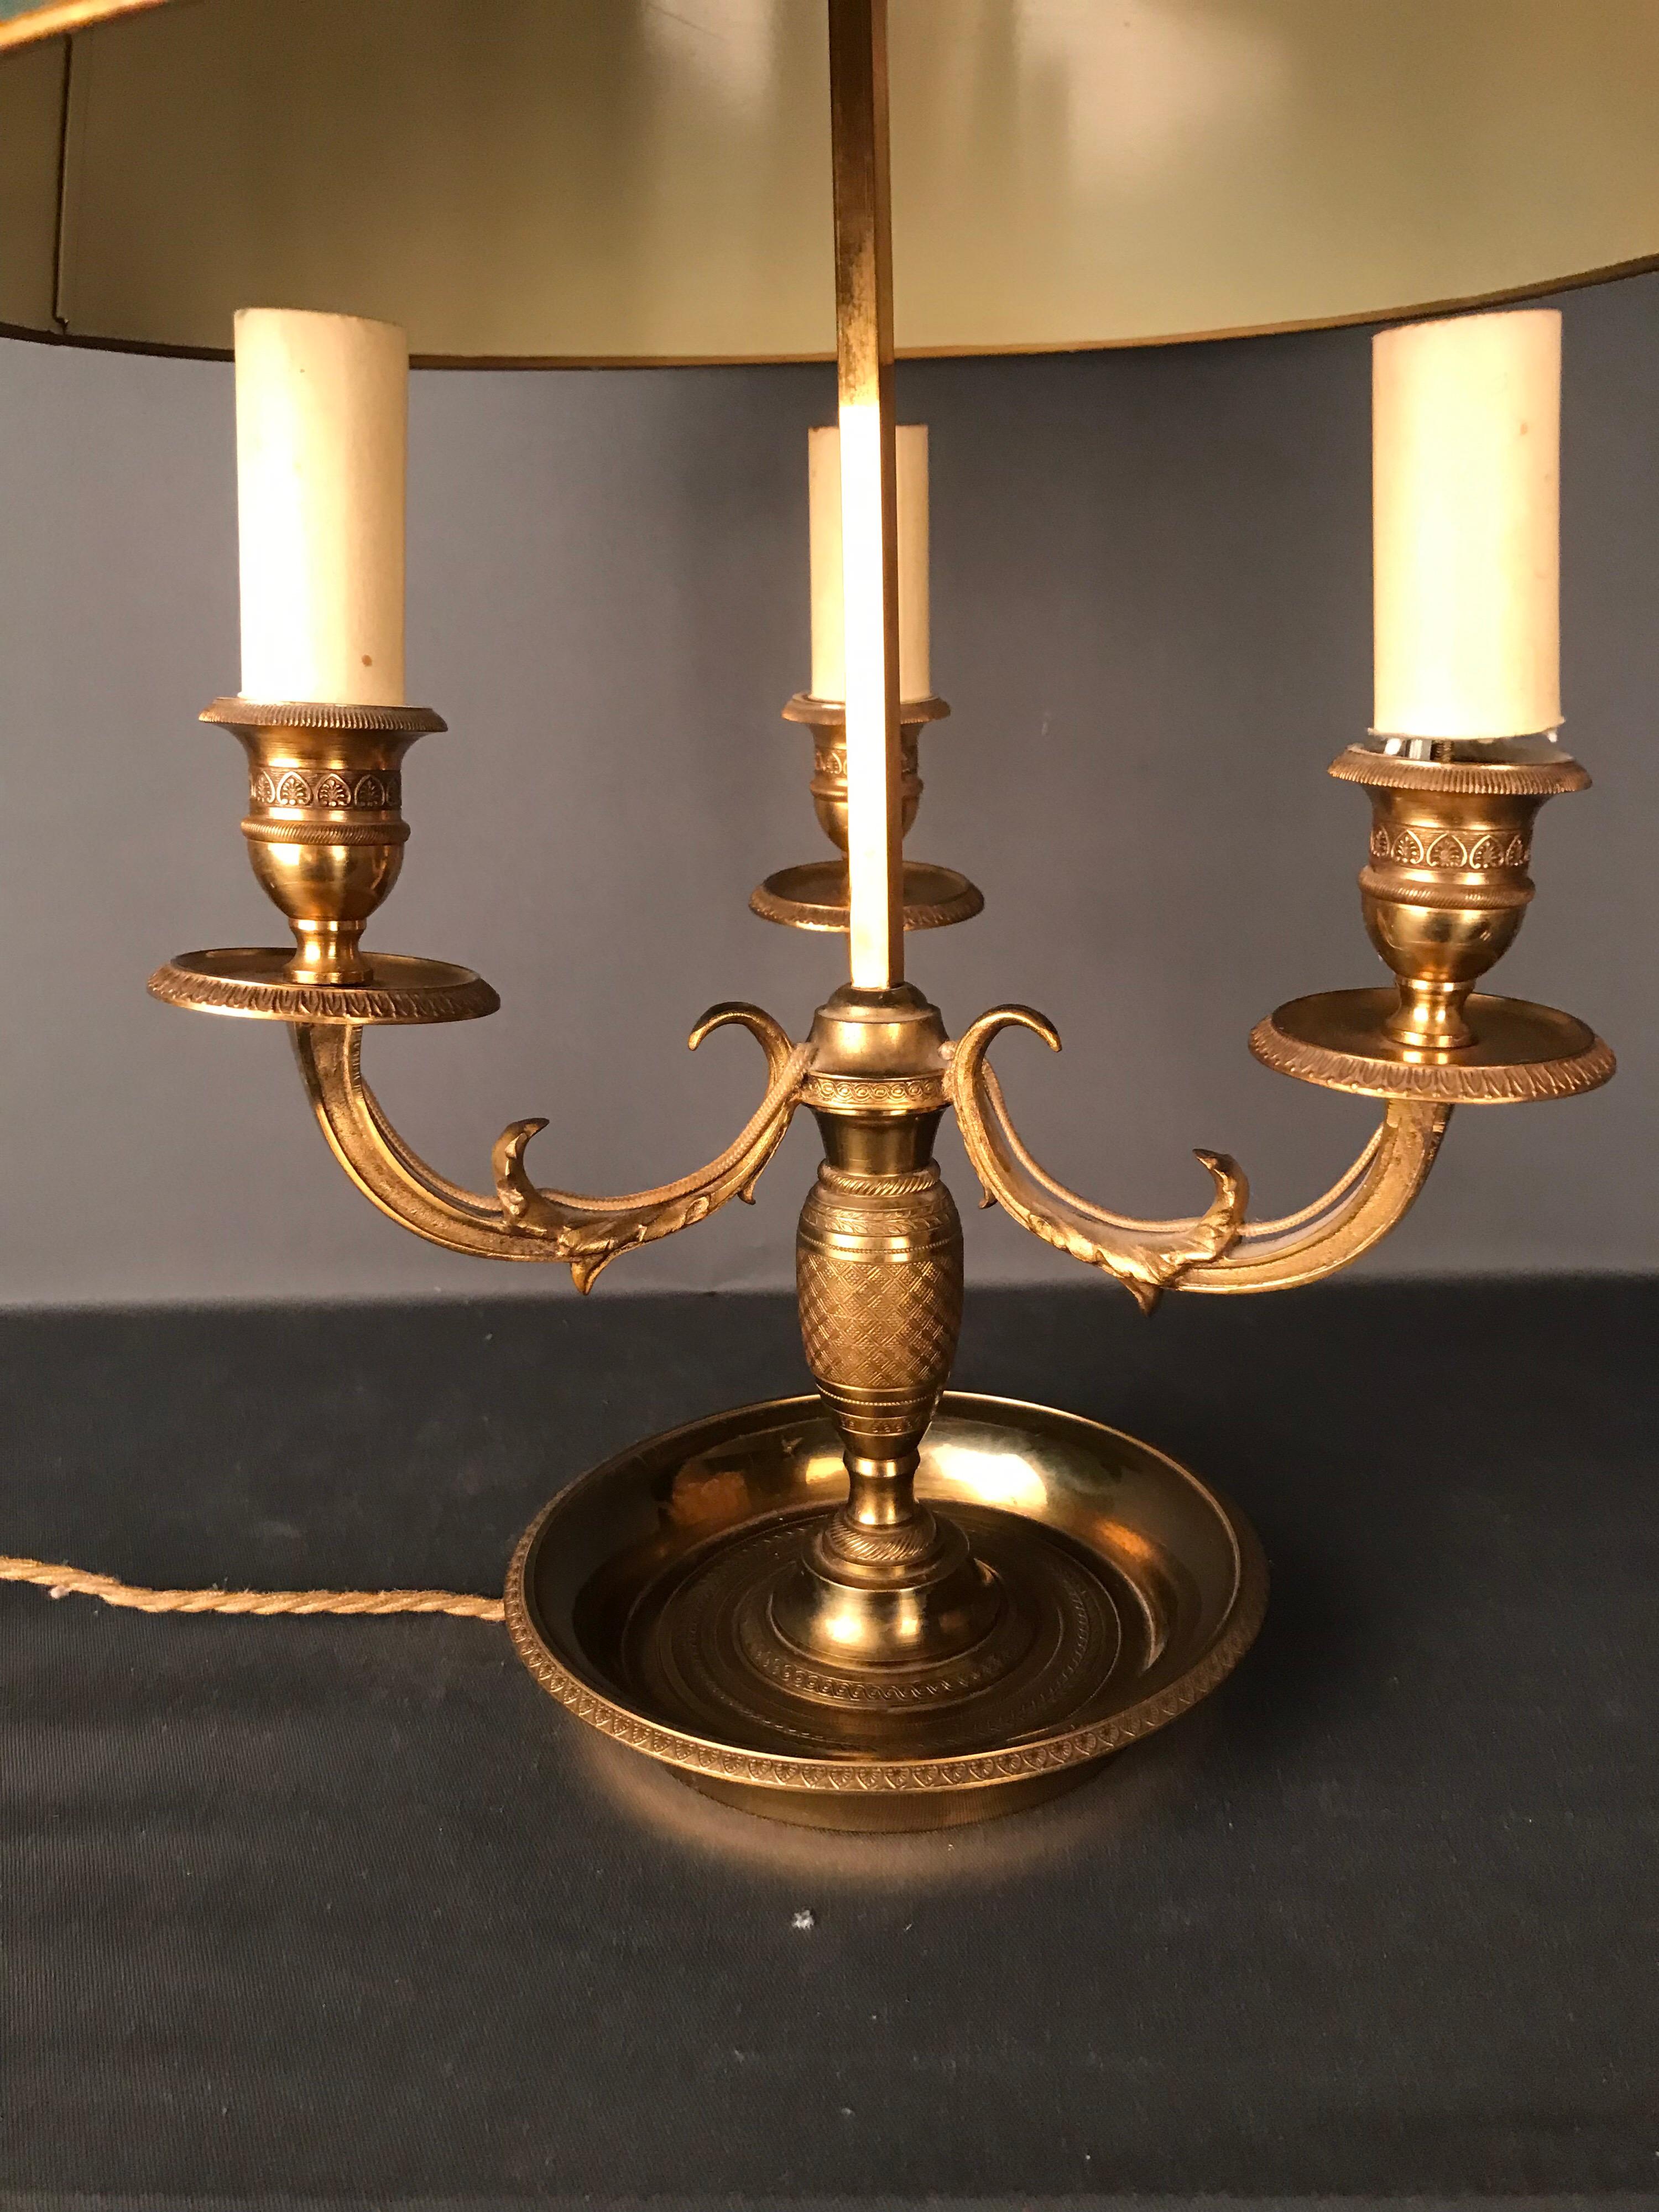 Antique desk lamp / table lamp Empire circa 1900, gold-plated bronze.

Solid bronze, fire-gilt, France circa 1900.
Table map with 3 sockets, electrified. Extremely finely chiselled bronze with a green shade, height adjustable. The top is crowned